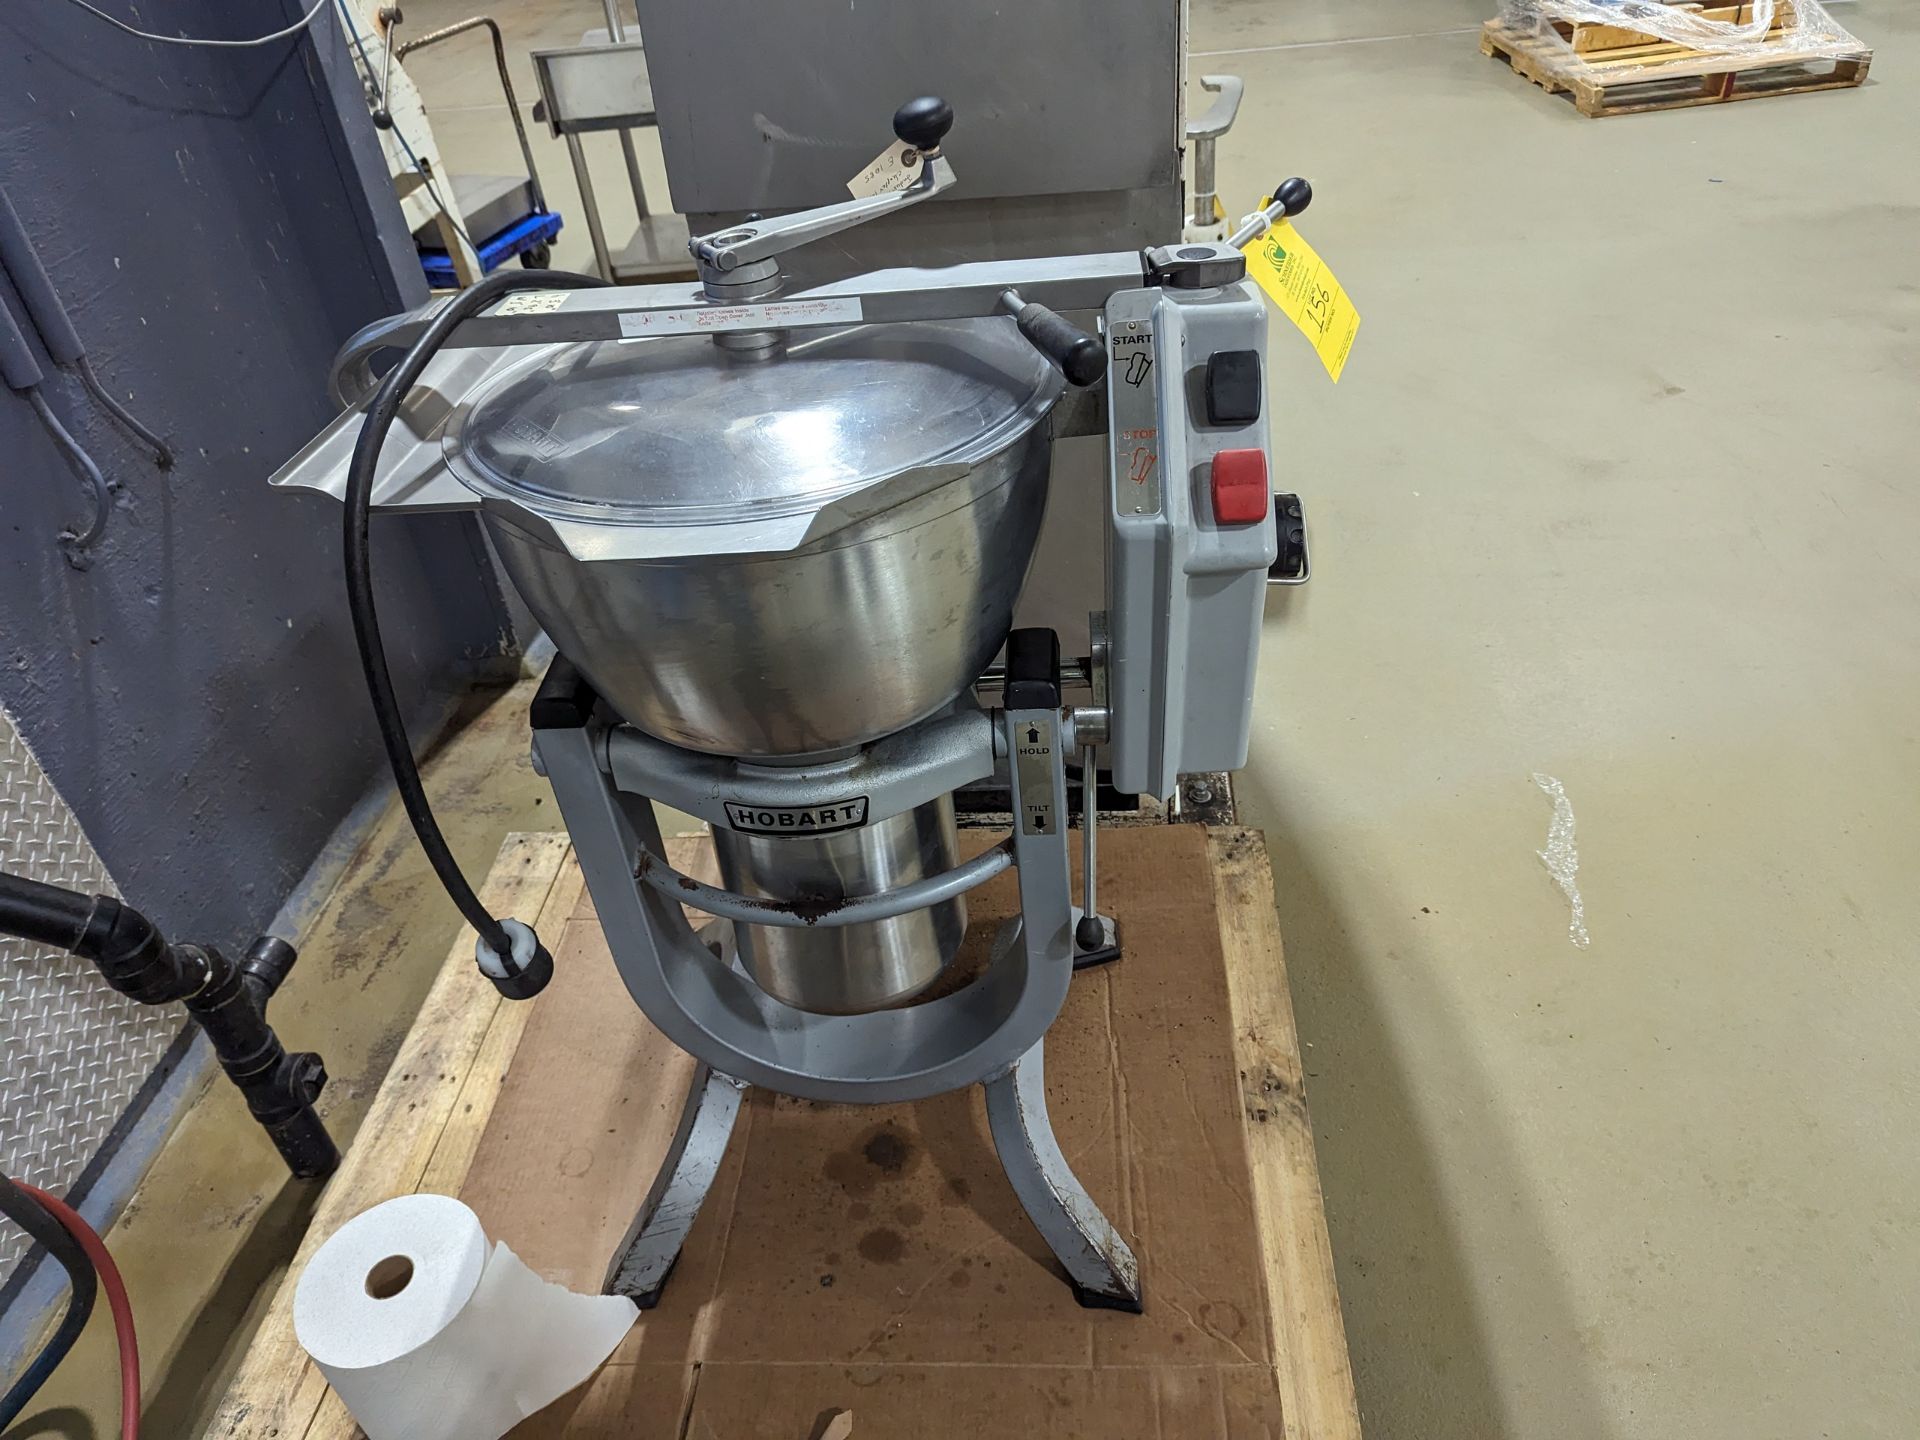 Hobart HCM450 Vertical Cutter Mixer - Not working, Dimensions LxWxH: 32x24x56 - Image 2 of 6